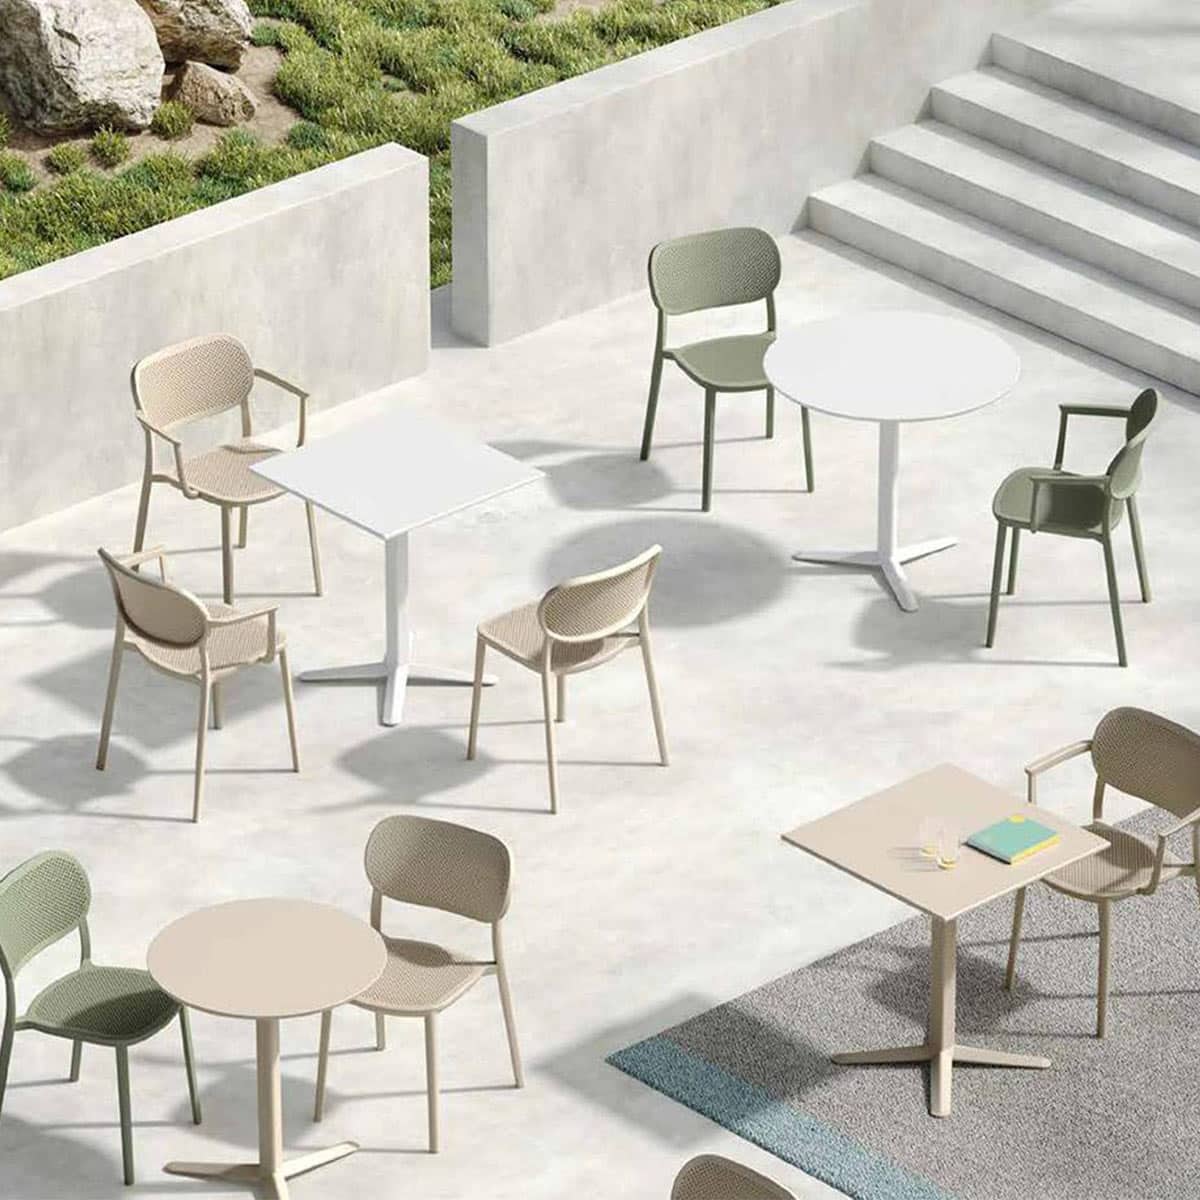 Mobilier-terrasse-restaurant-inspiration-chaises-empilables-Nut-Nut-tables-Raky